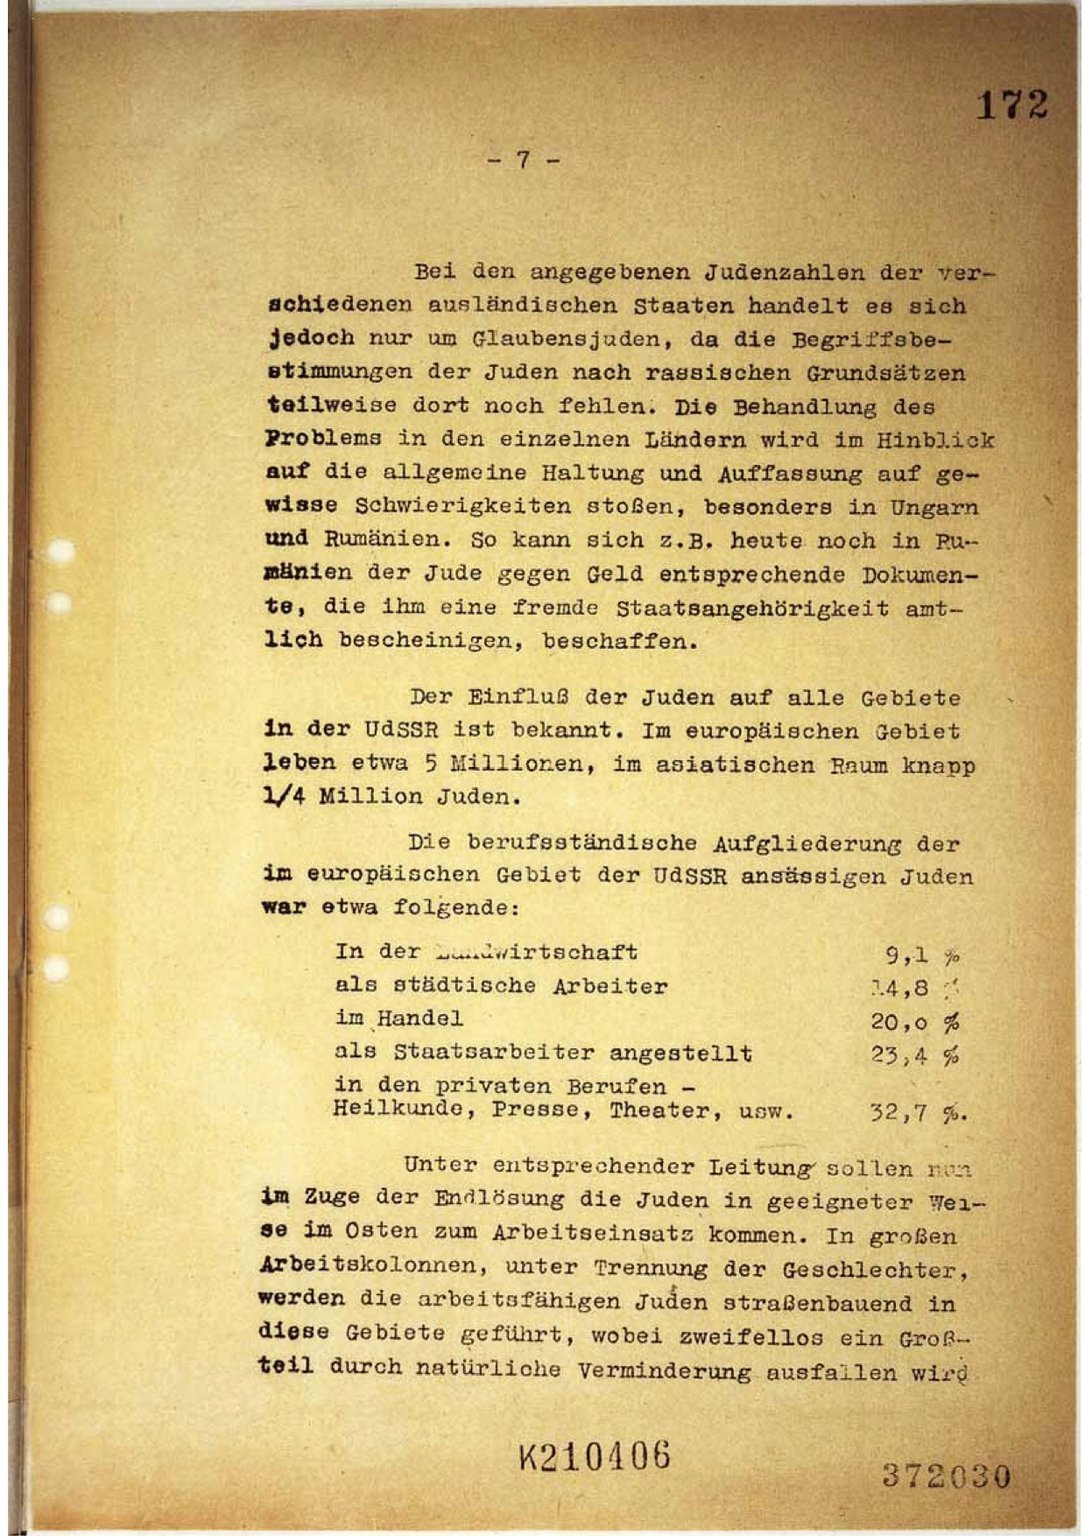 Page from the minutes of the Wannsee Conference. It says that Jews will be moved to the East under the guise of employment policies. Most of them are expected to die due to the hard work. The rest will be given ‘appropriate treatment’, i.e. be murdered.